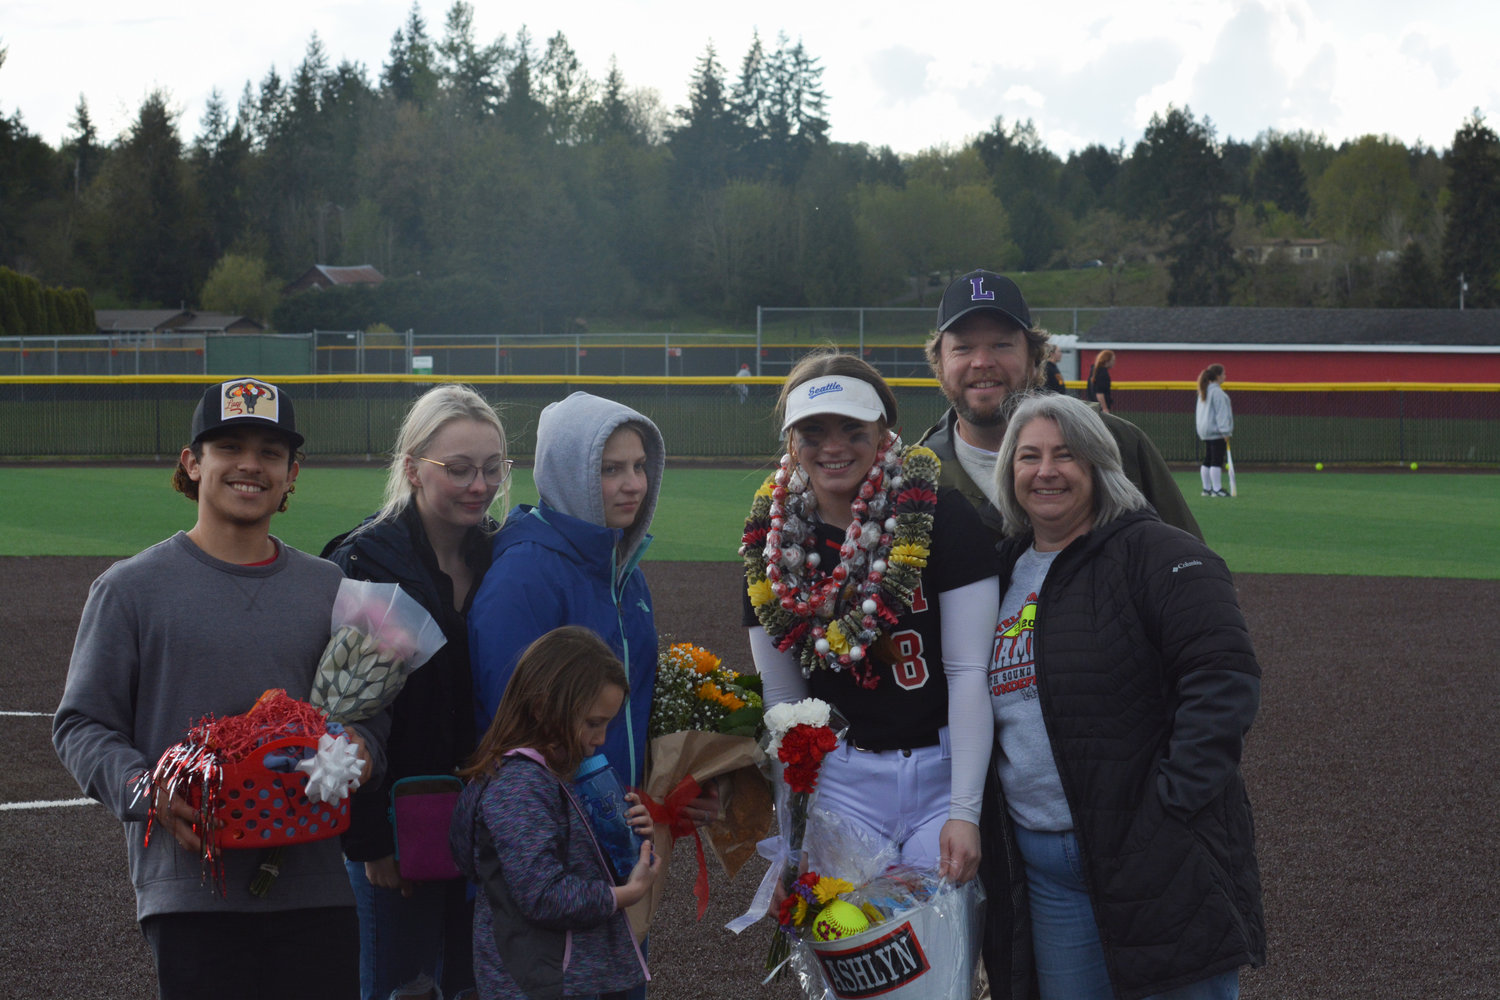 Senior third baseman Ashlyn Aven poses for a photo with her family and boyfriend after the senior night game on May 9.